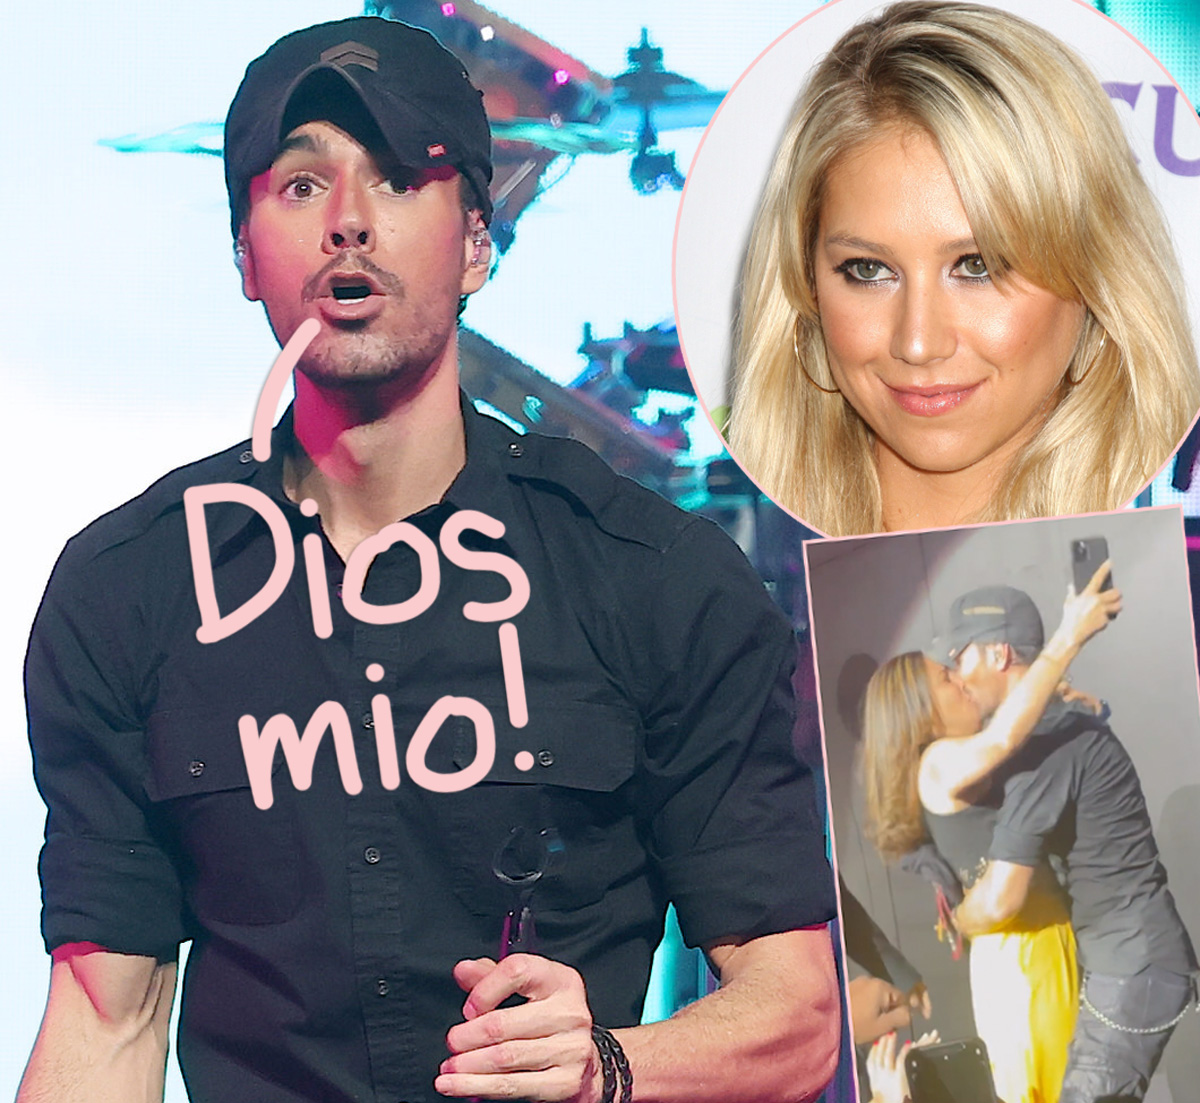 #Enrique Iglesias Slammed Online Over Jaw-Dropping Meet-And-Greet Makeout Video With A Female Fan!